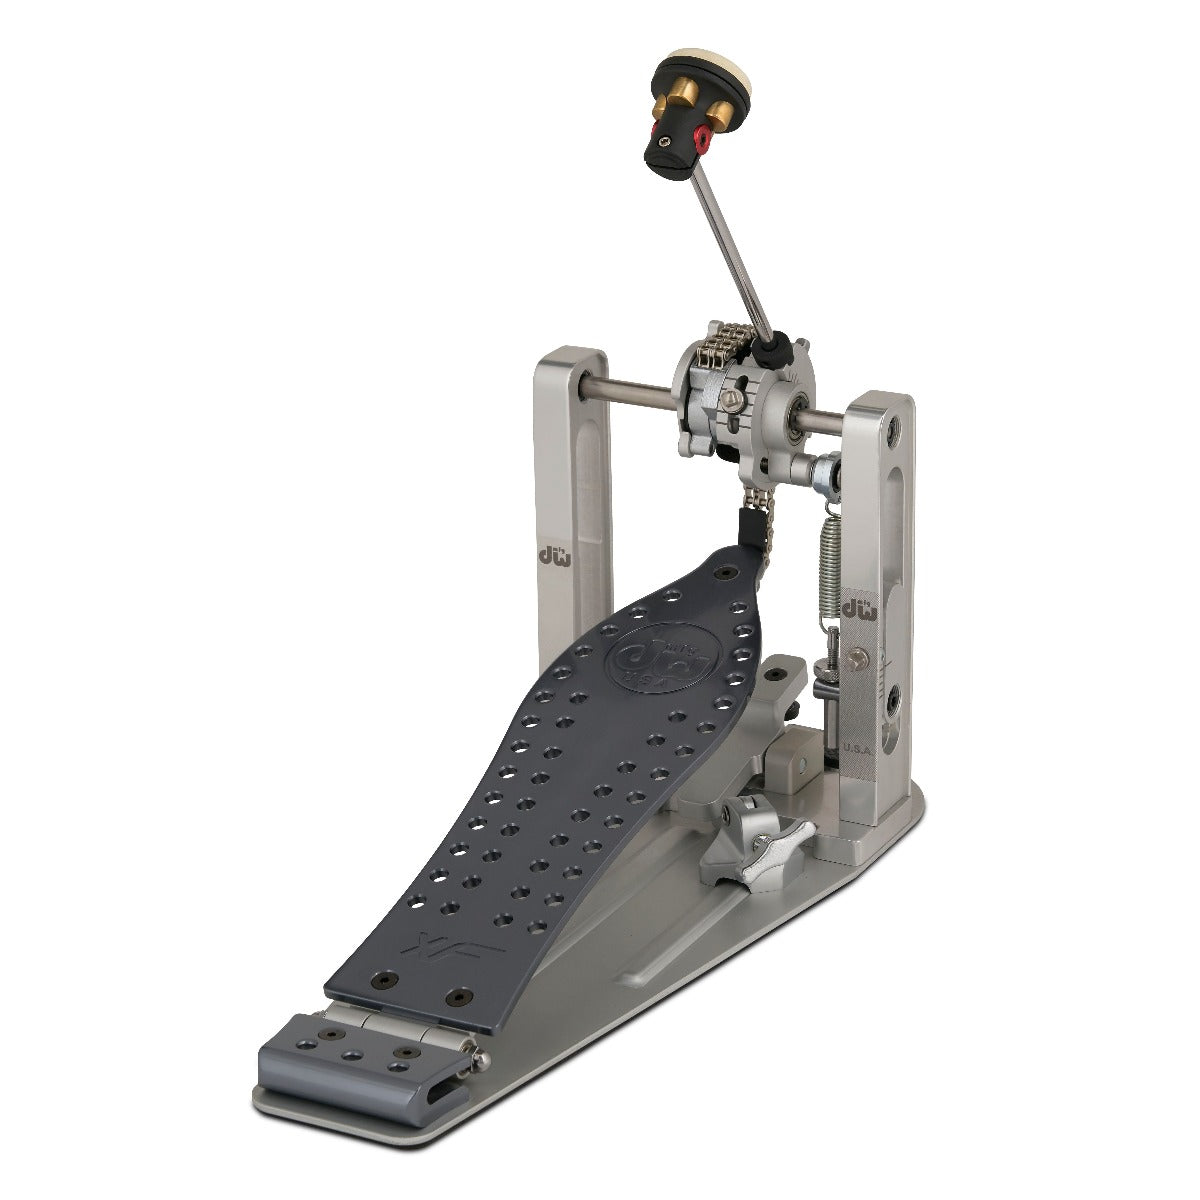 DW Machined Chain Drive Single Bass Drum Pedal with extended footboard